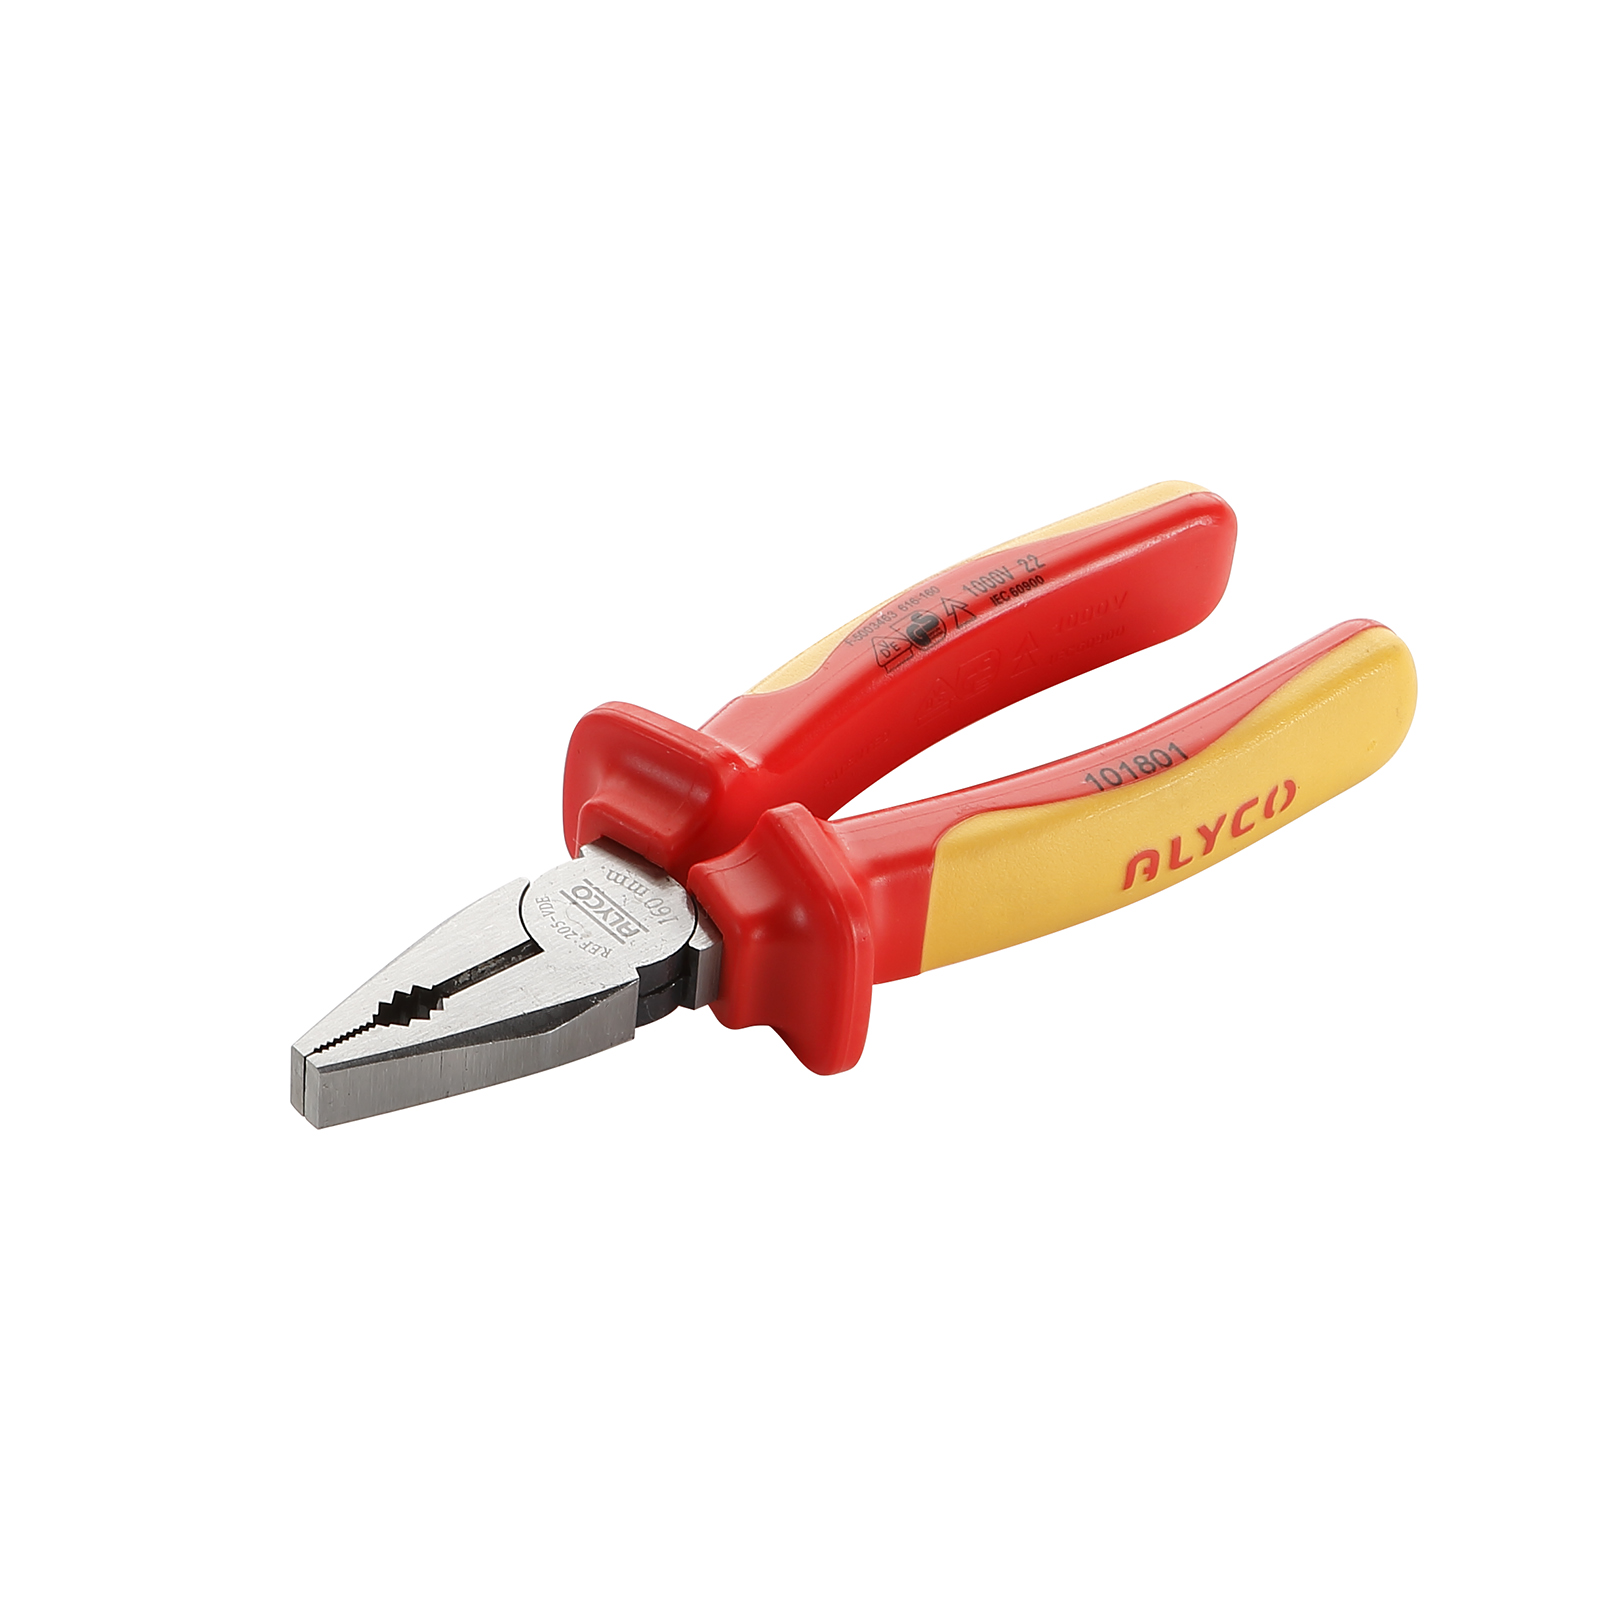 Beadsmith¬Æ Long Neck Hole Punch Pliers Contenti 370-387-GRP